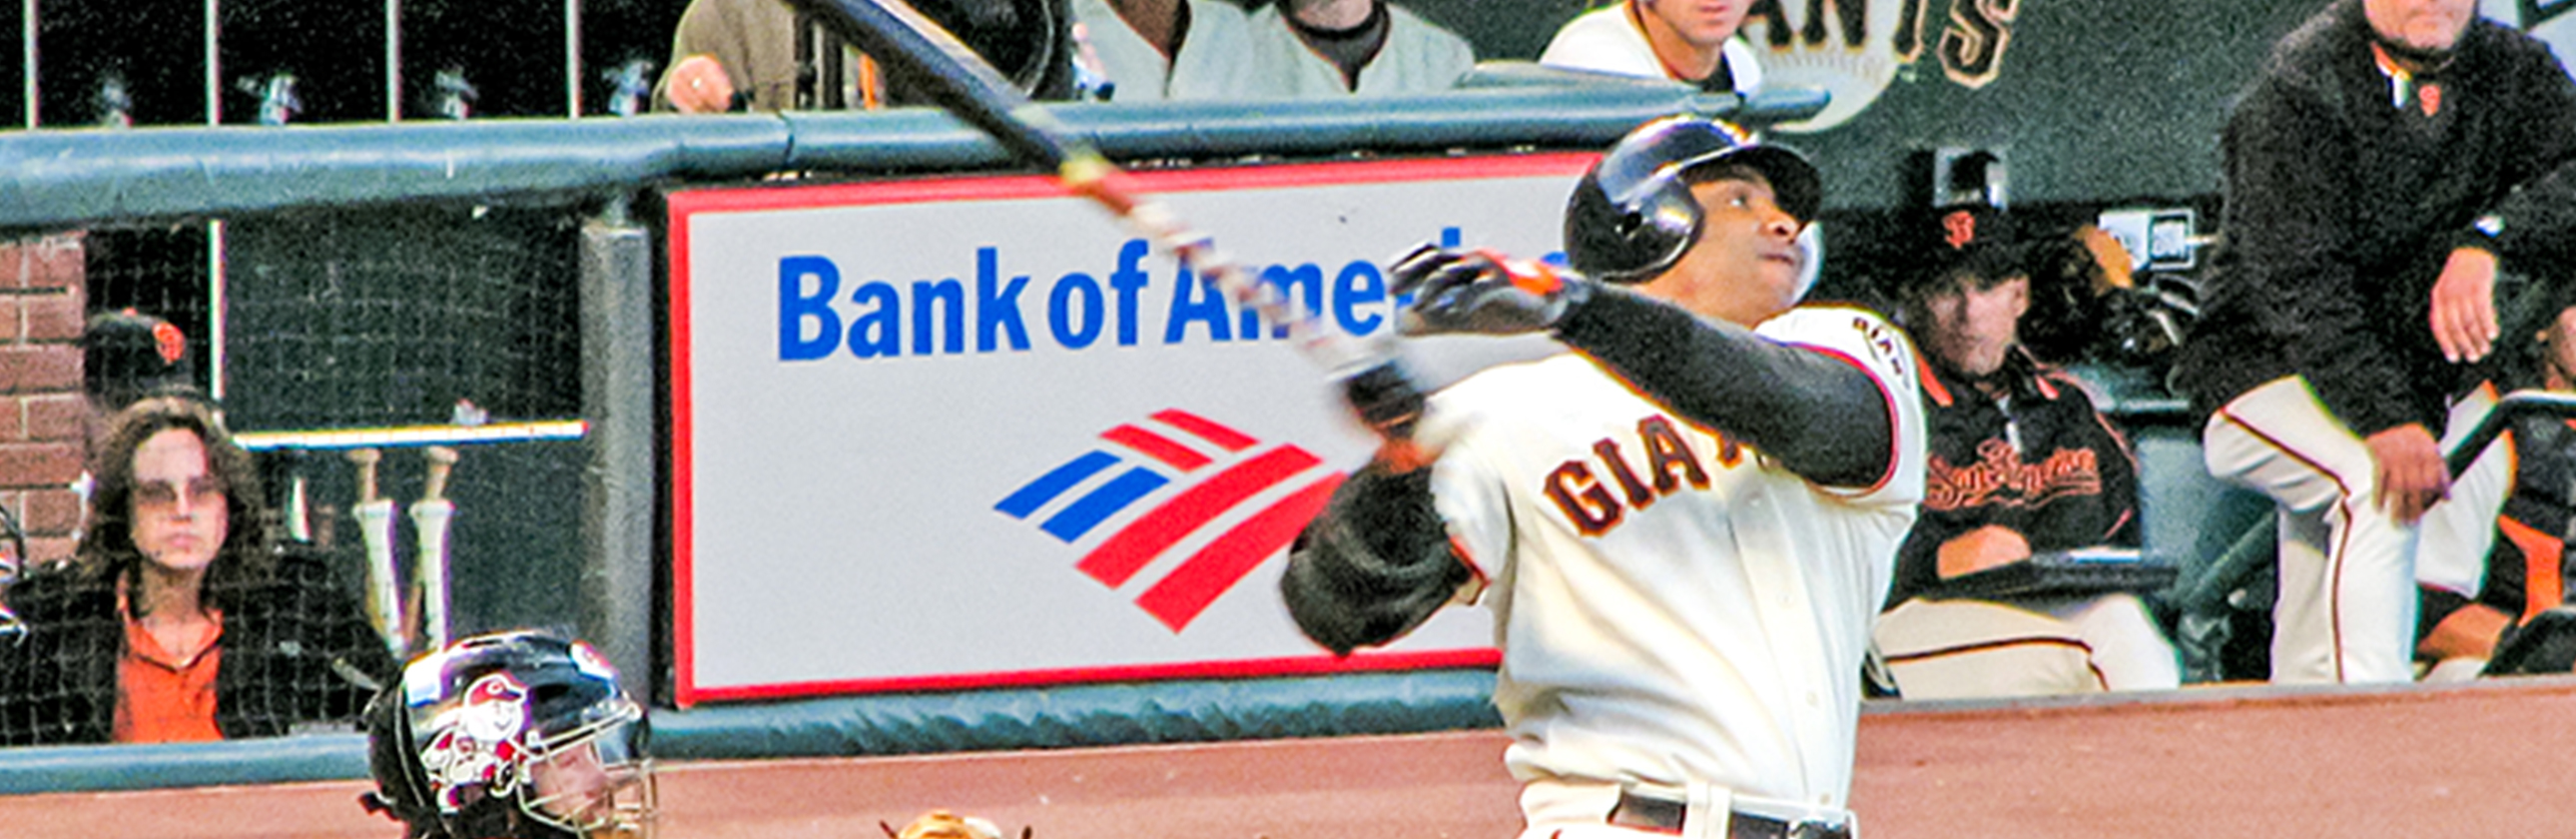 Hall of Fame: Barry Bonds' PED ties will keep home-run king out